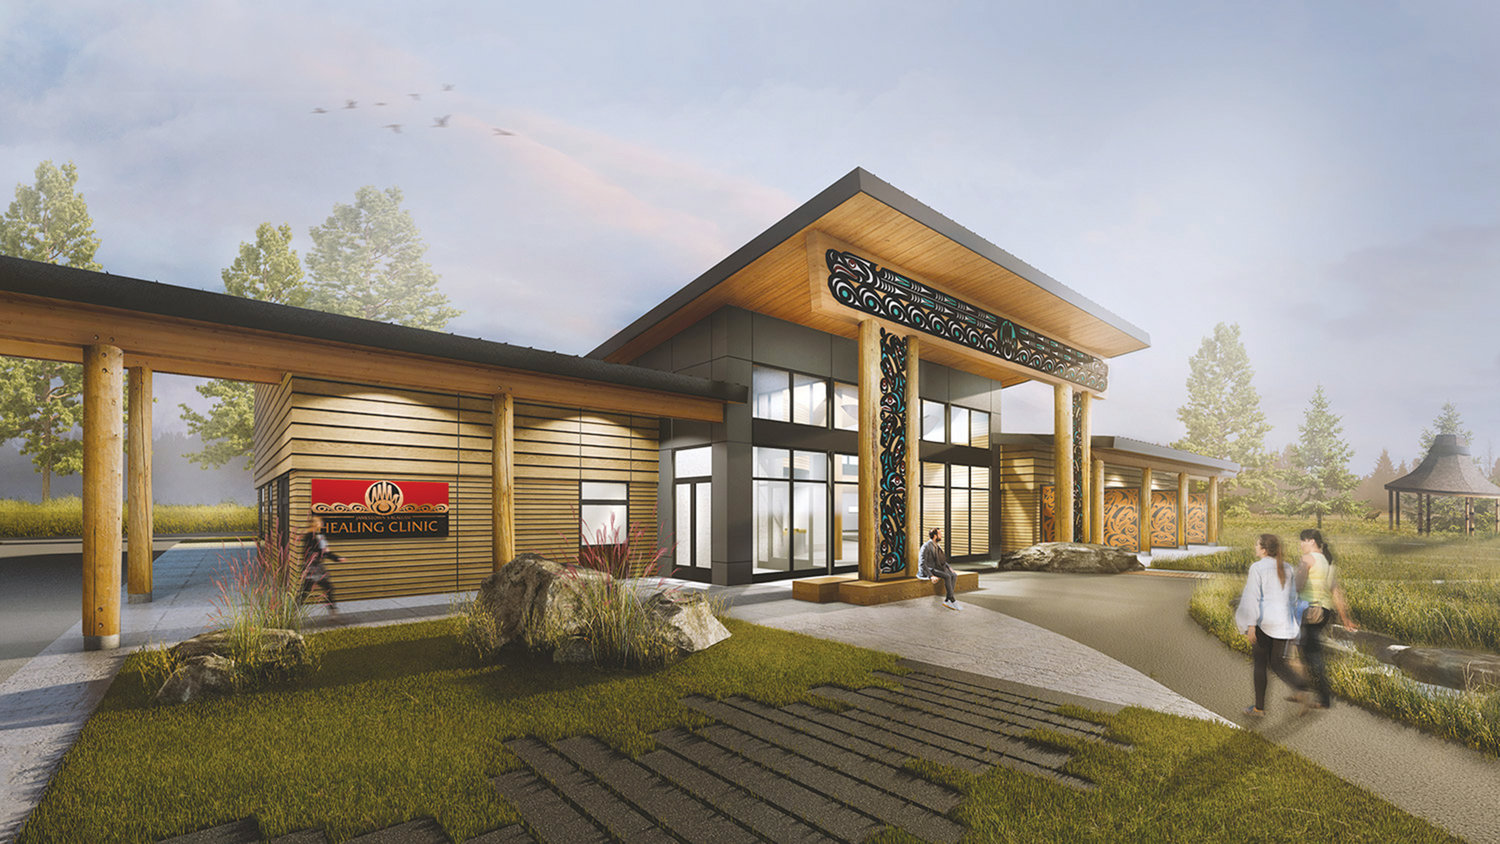 An artist’s rendering of the proposed Healing Campus shows a building that will offer a holistic approach to substance abuse disorder treatment.